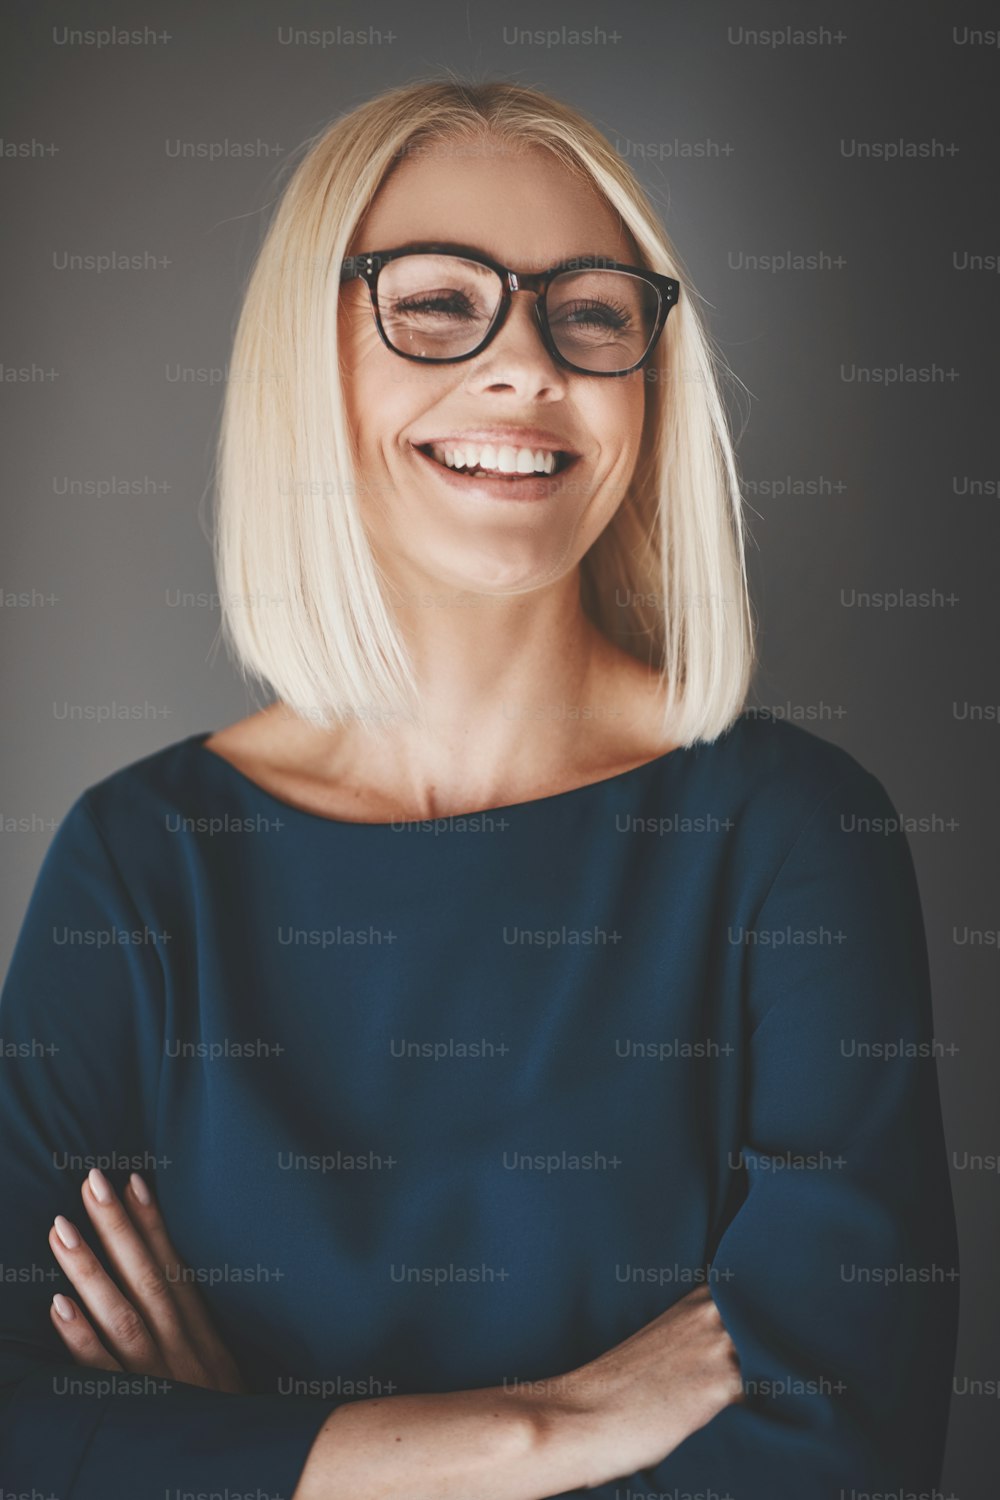 Smiling young businesswoman wearing glasses standing with her arms crossed against a gray background